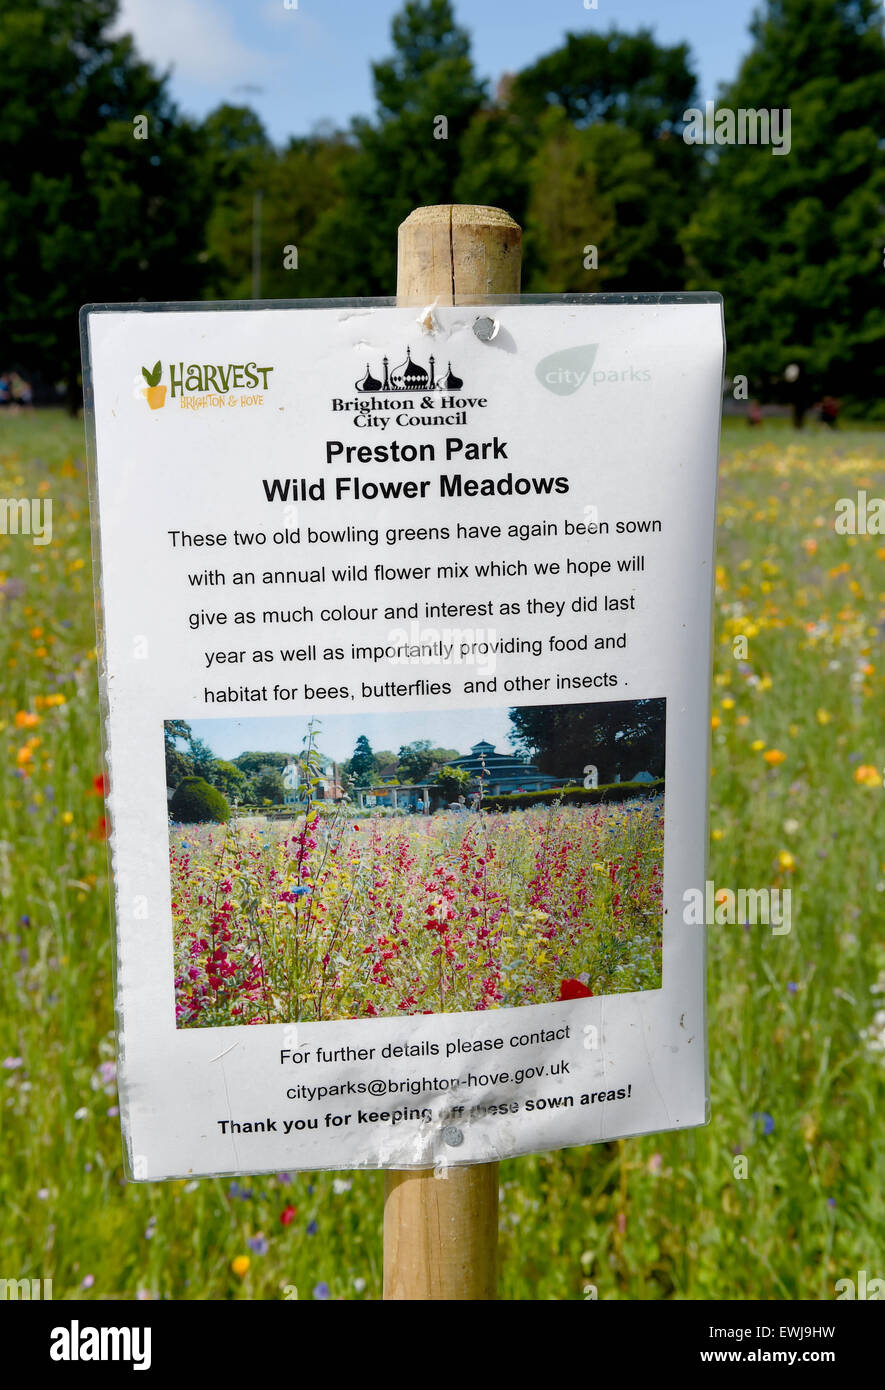 Brighton, UK. 27th June, 2015. The  Preston Park Wild Flower Meadows in Brighton It is the second year a mixture of wild flowers have been sown on two old bowling greens by the city council providing habitat and food for bees , butterflies and other insects  Credit:  Simon Dack/Alamy Live News Stock Photo